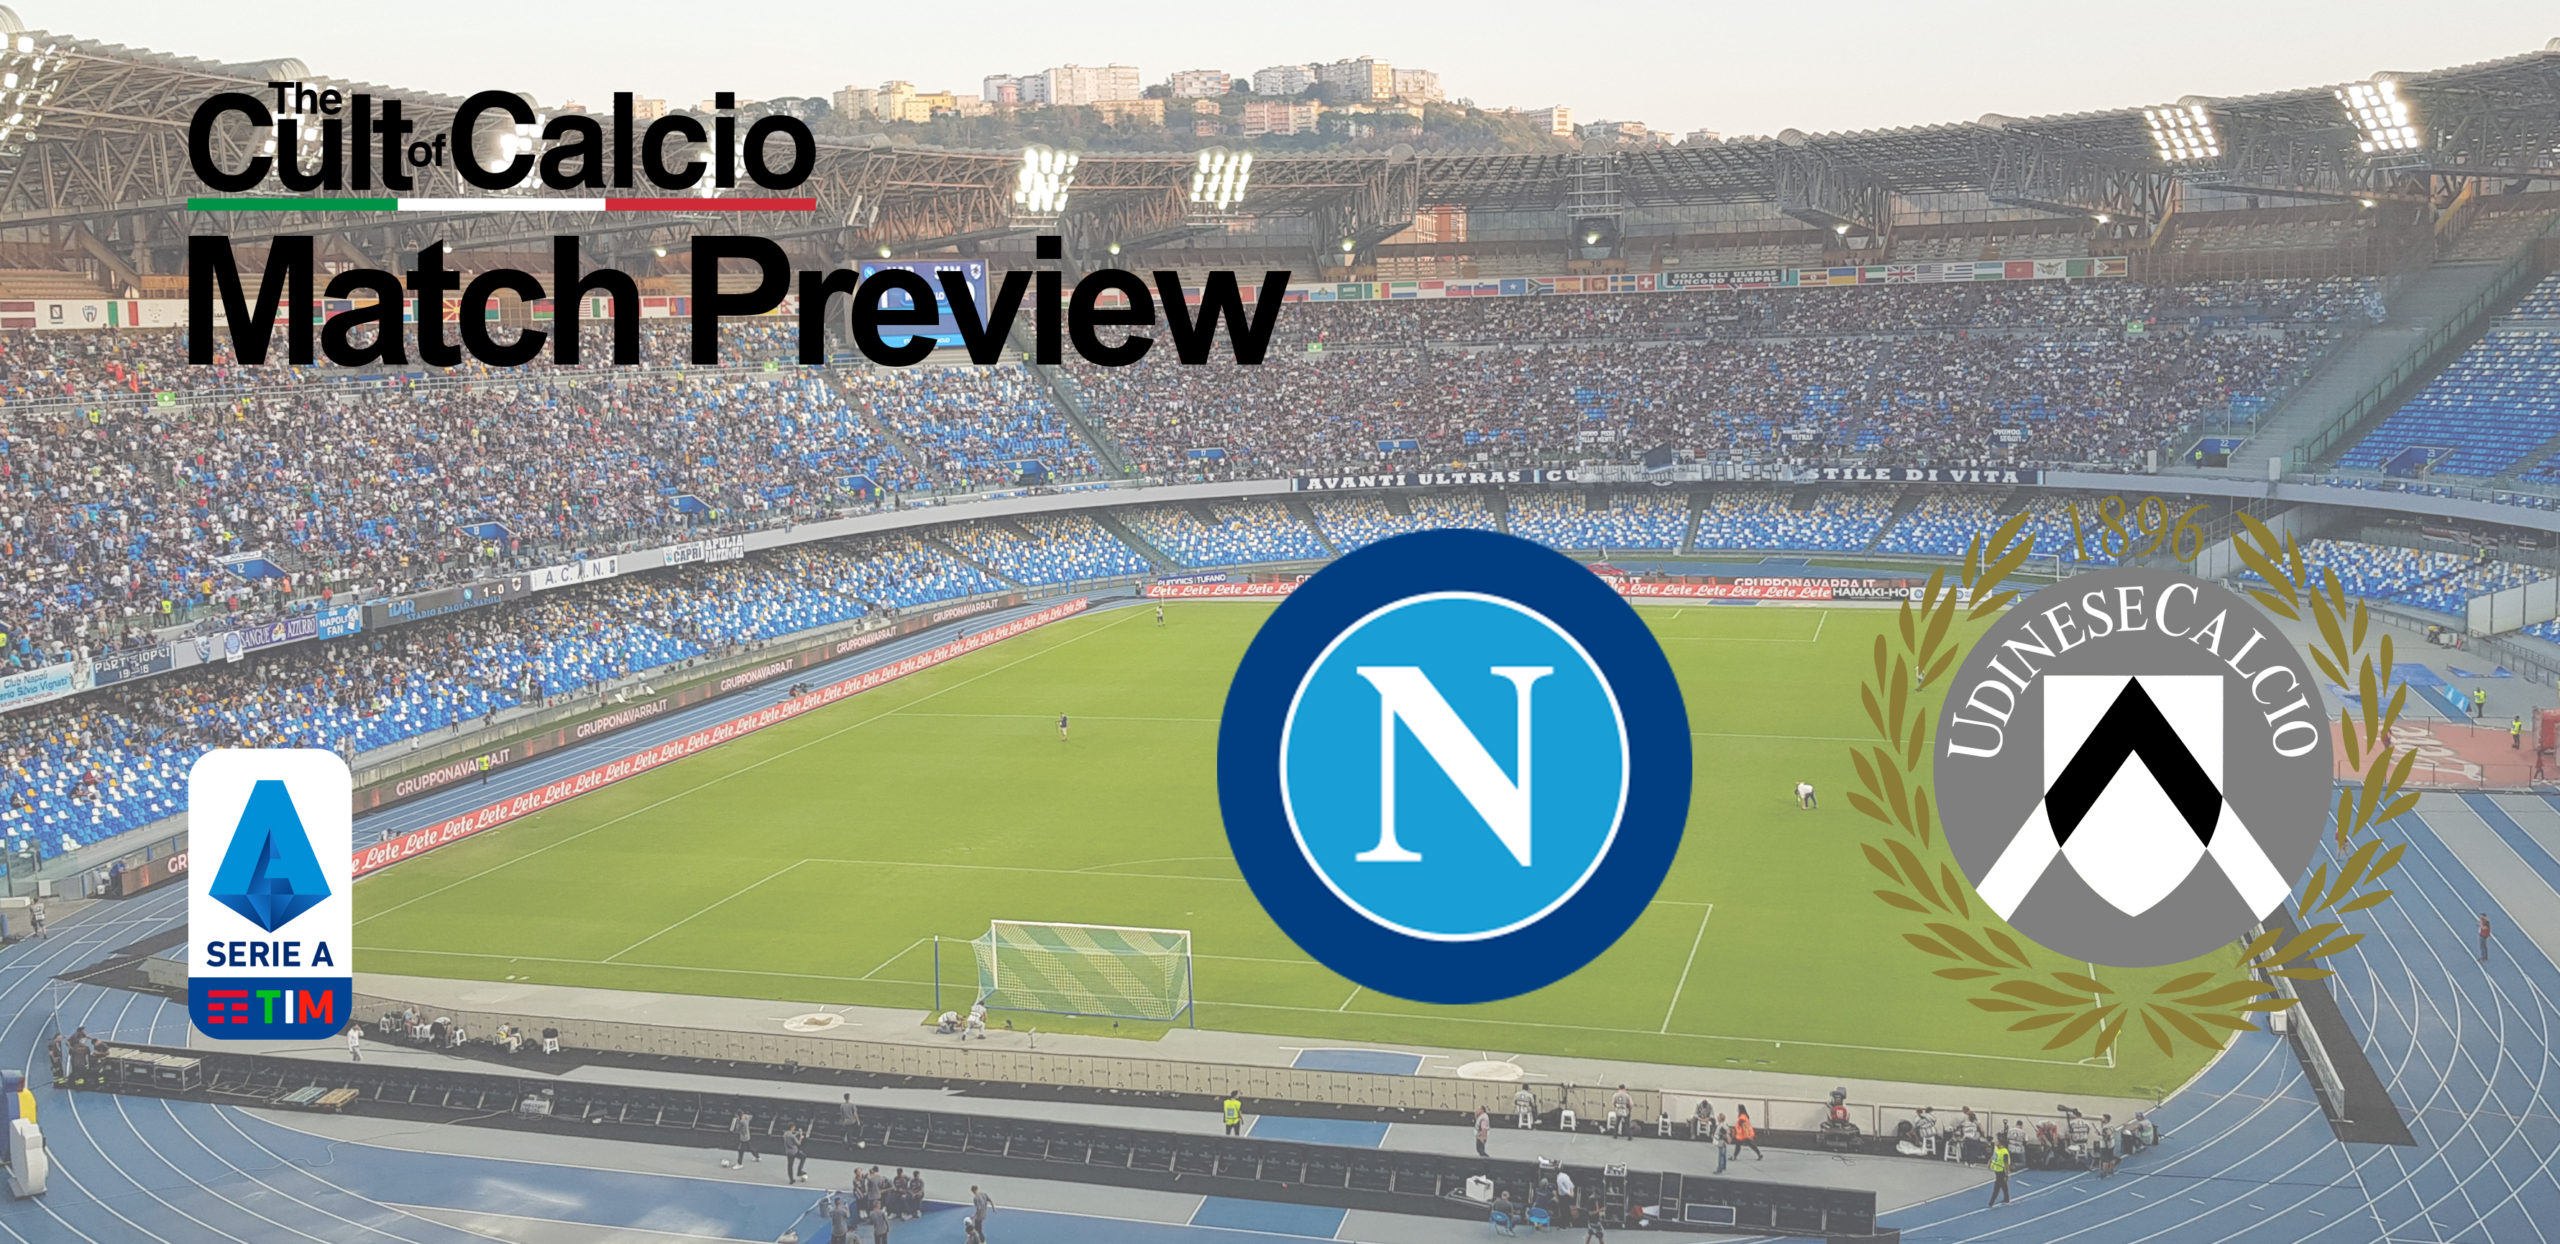 Saturday's Serie A action gets underway at the Stadio Diego Armando Maradona, where second-placed Napoli entertain 14th-placed Udinese